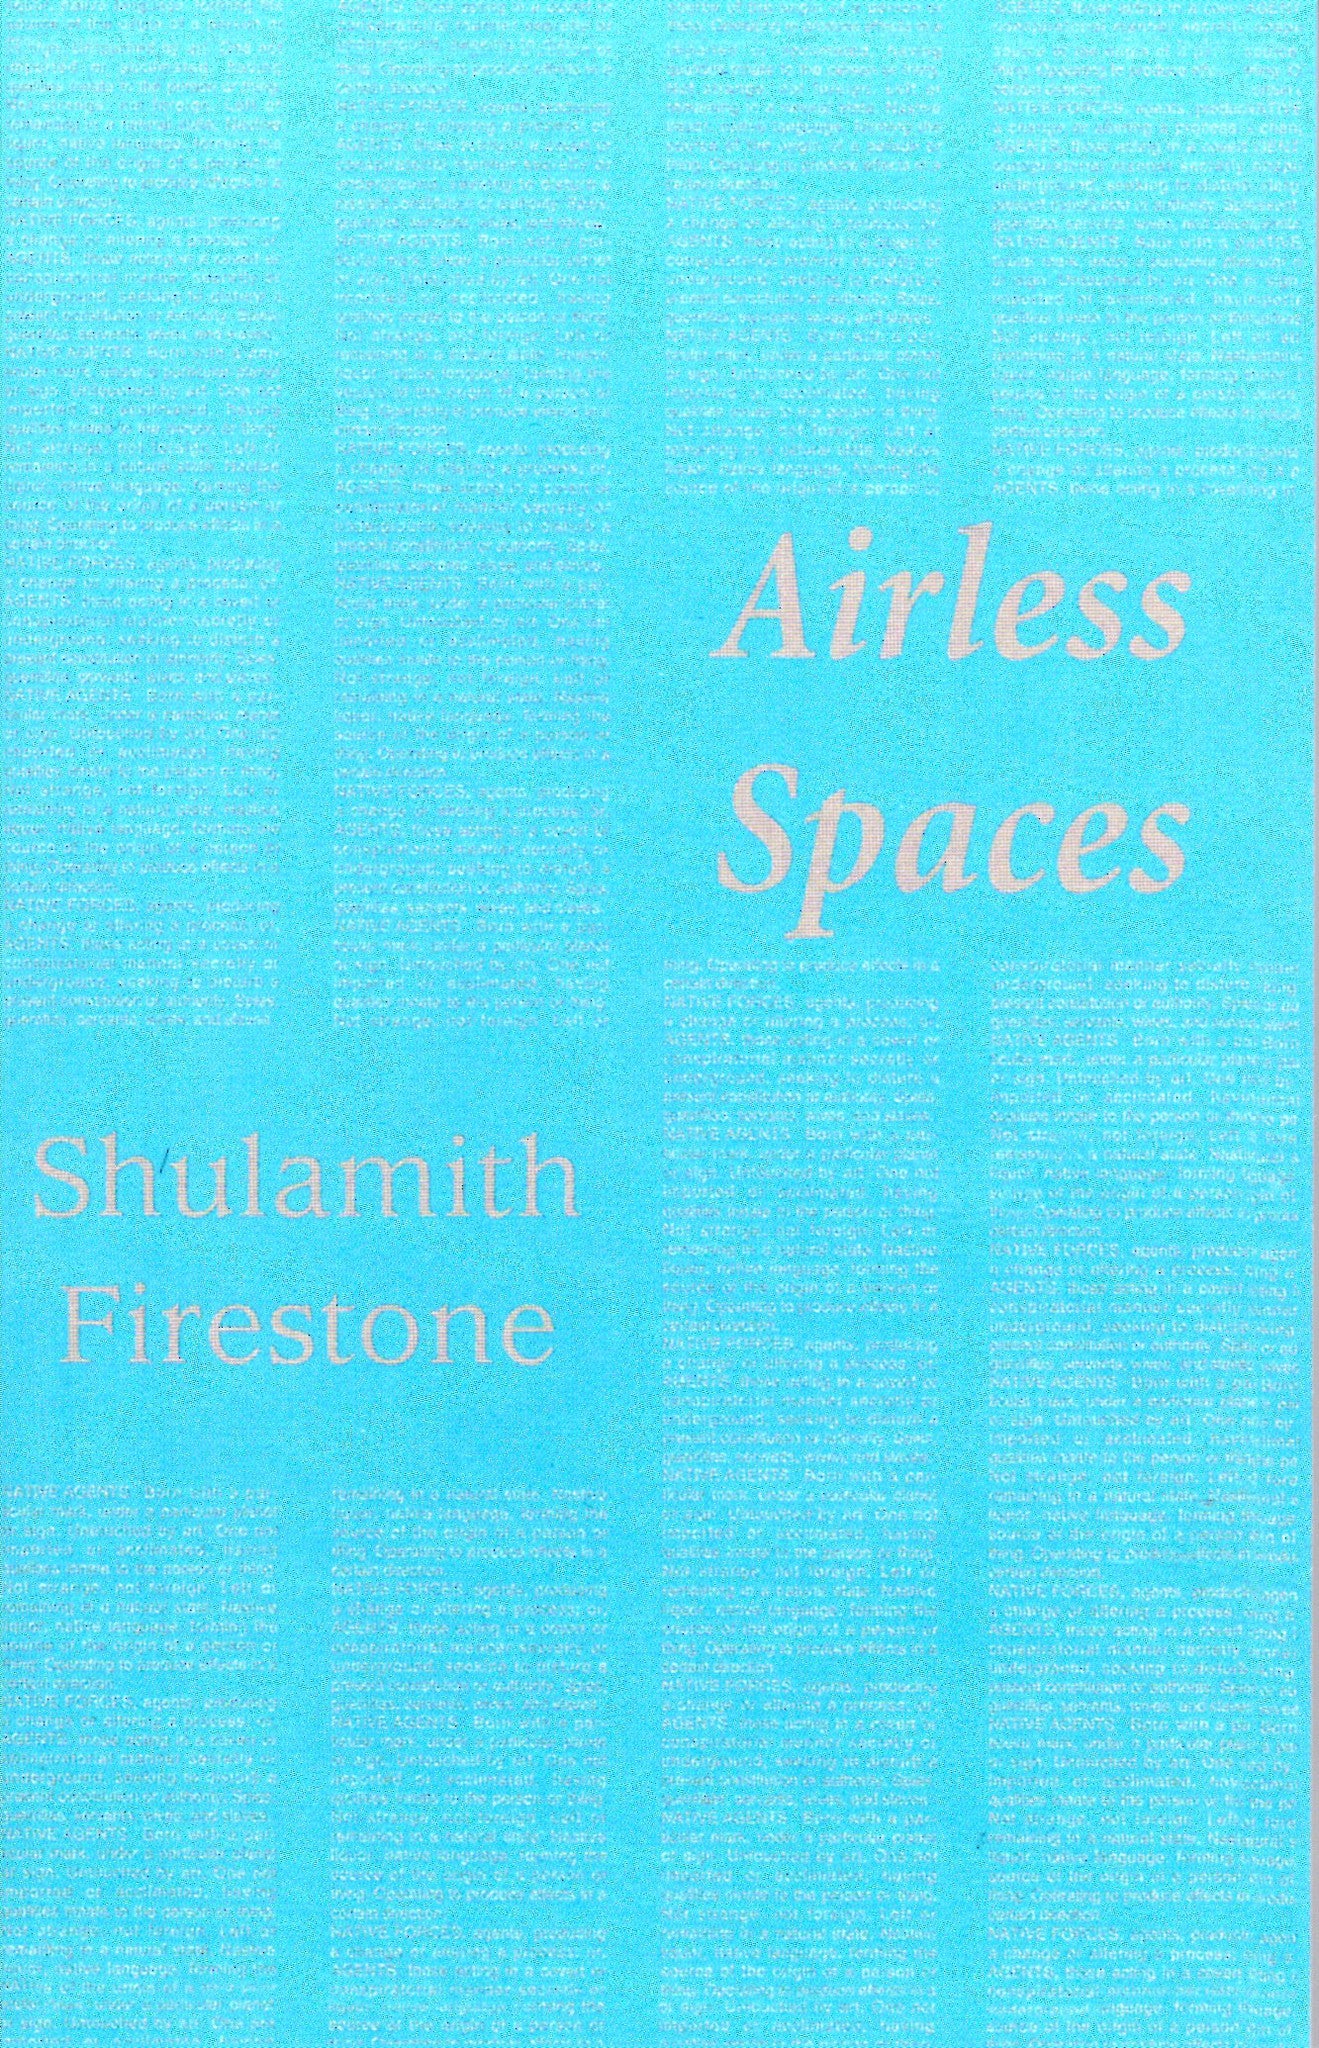 Shulamith Firestone: Airless Spaces